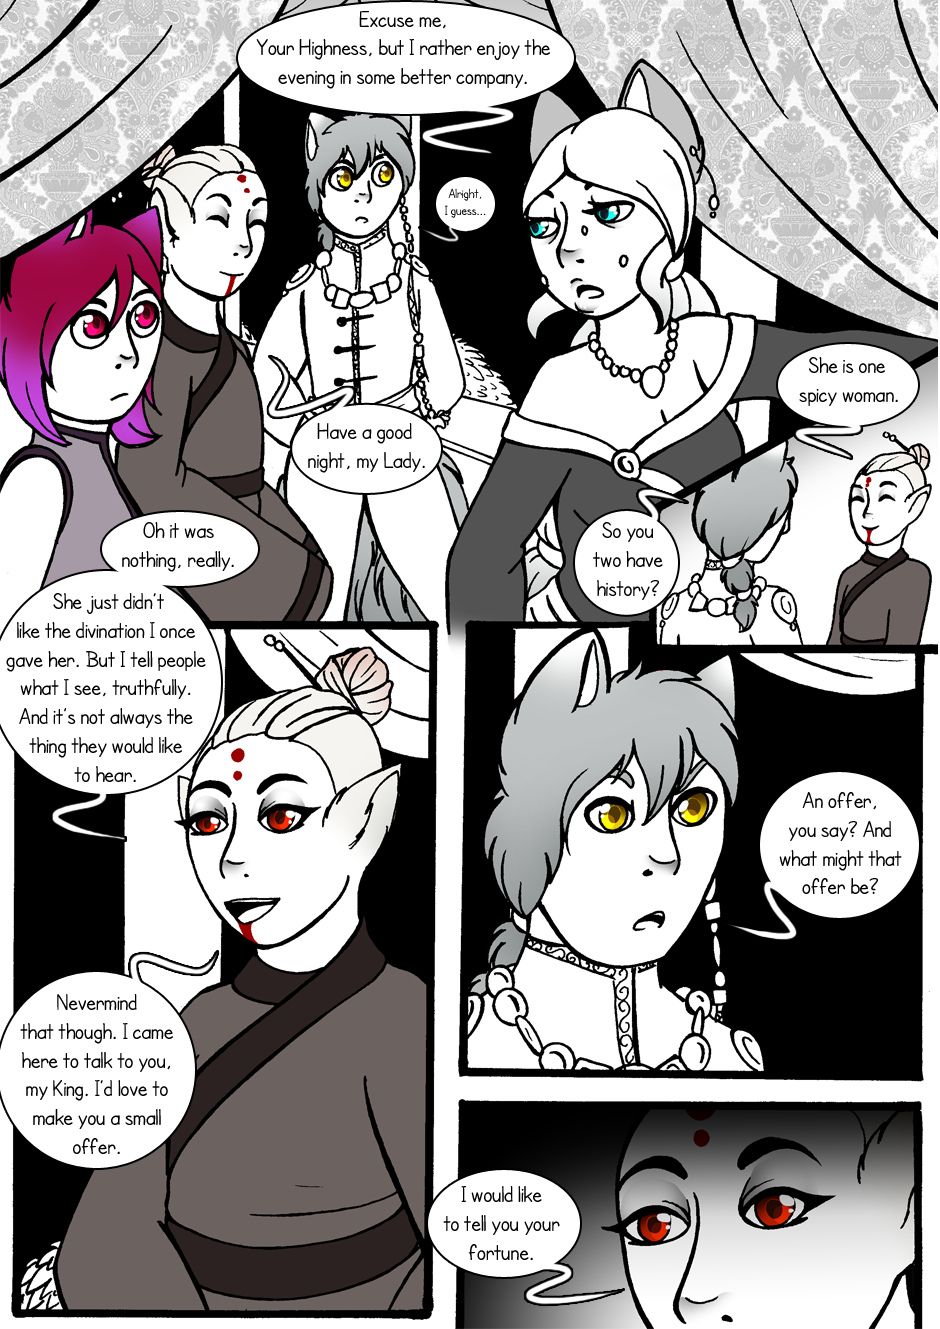 [Jeny-jen94] Between Kings and Queens [Ongoing] 25